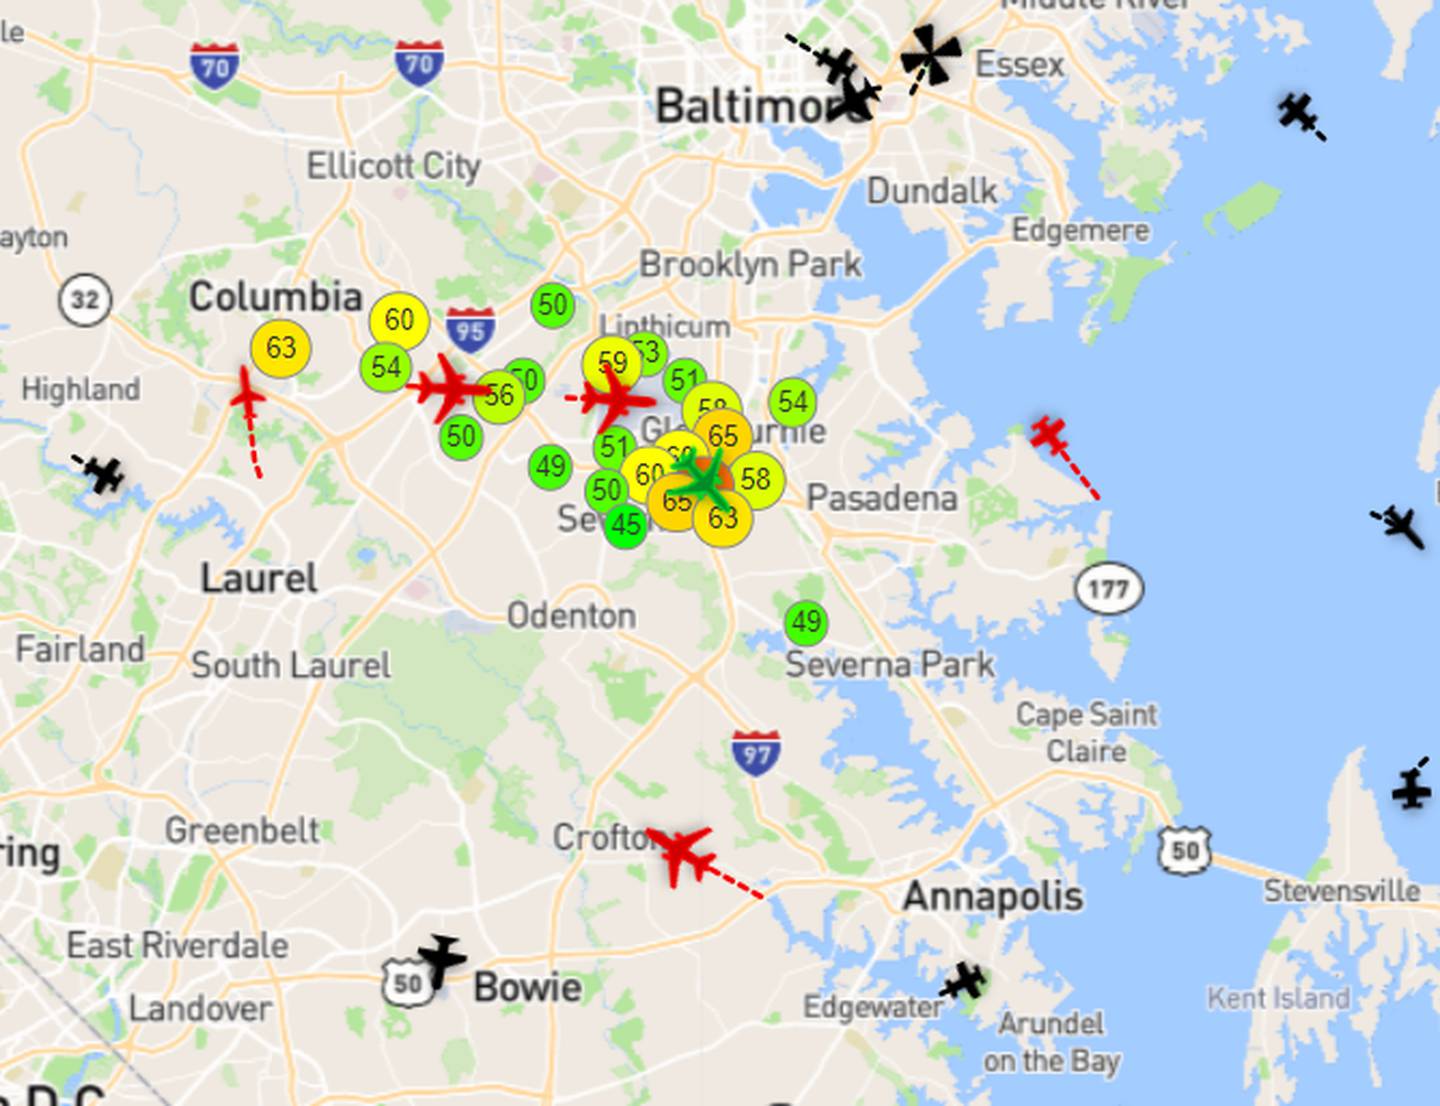 The Maryland Aviation Administration provides an interactive site that tracks aircraft flying around BWI Marshall Airport. It also allows anyone to file a noise complaint and follow readings at the airport's permanent noise monitors.